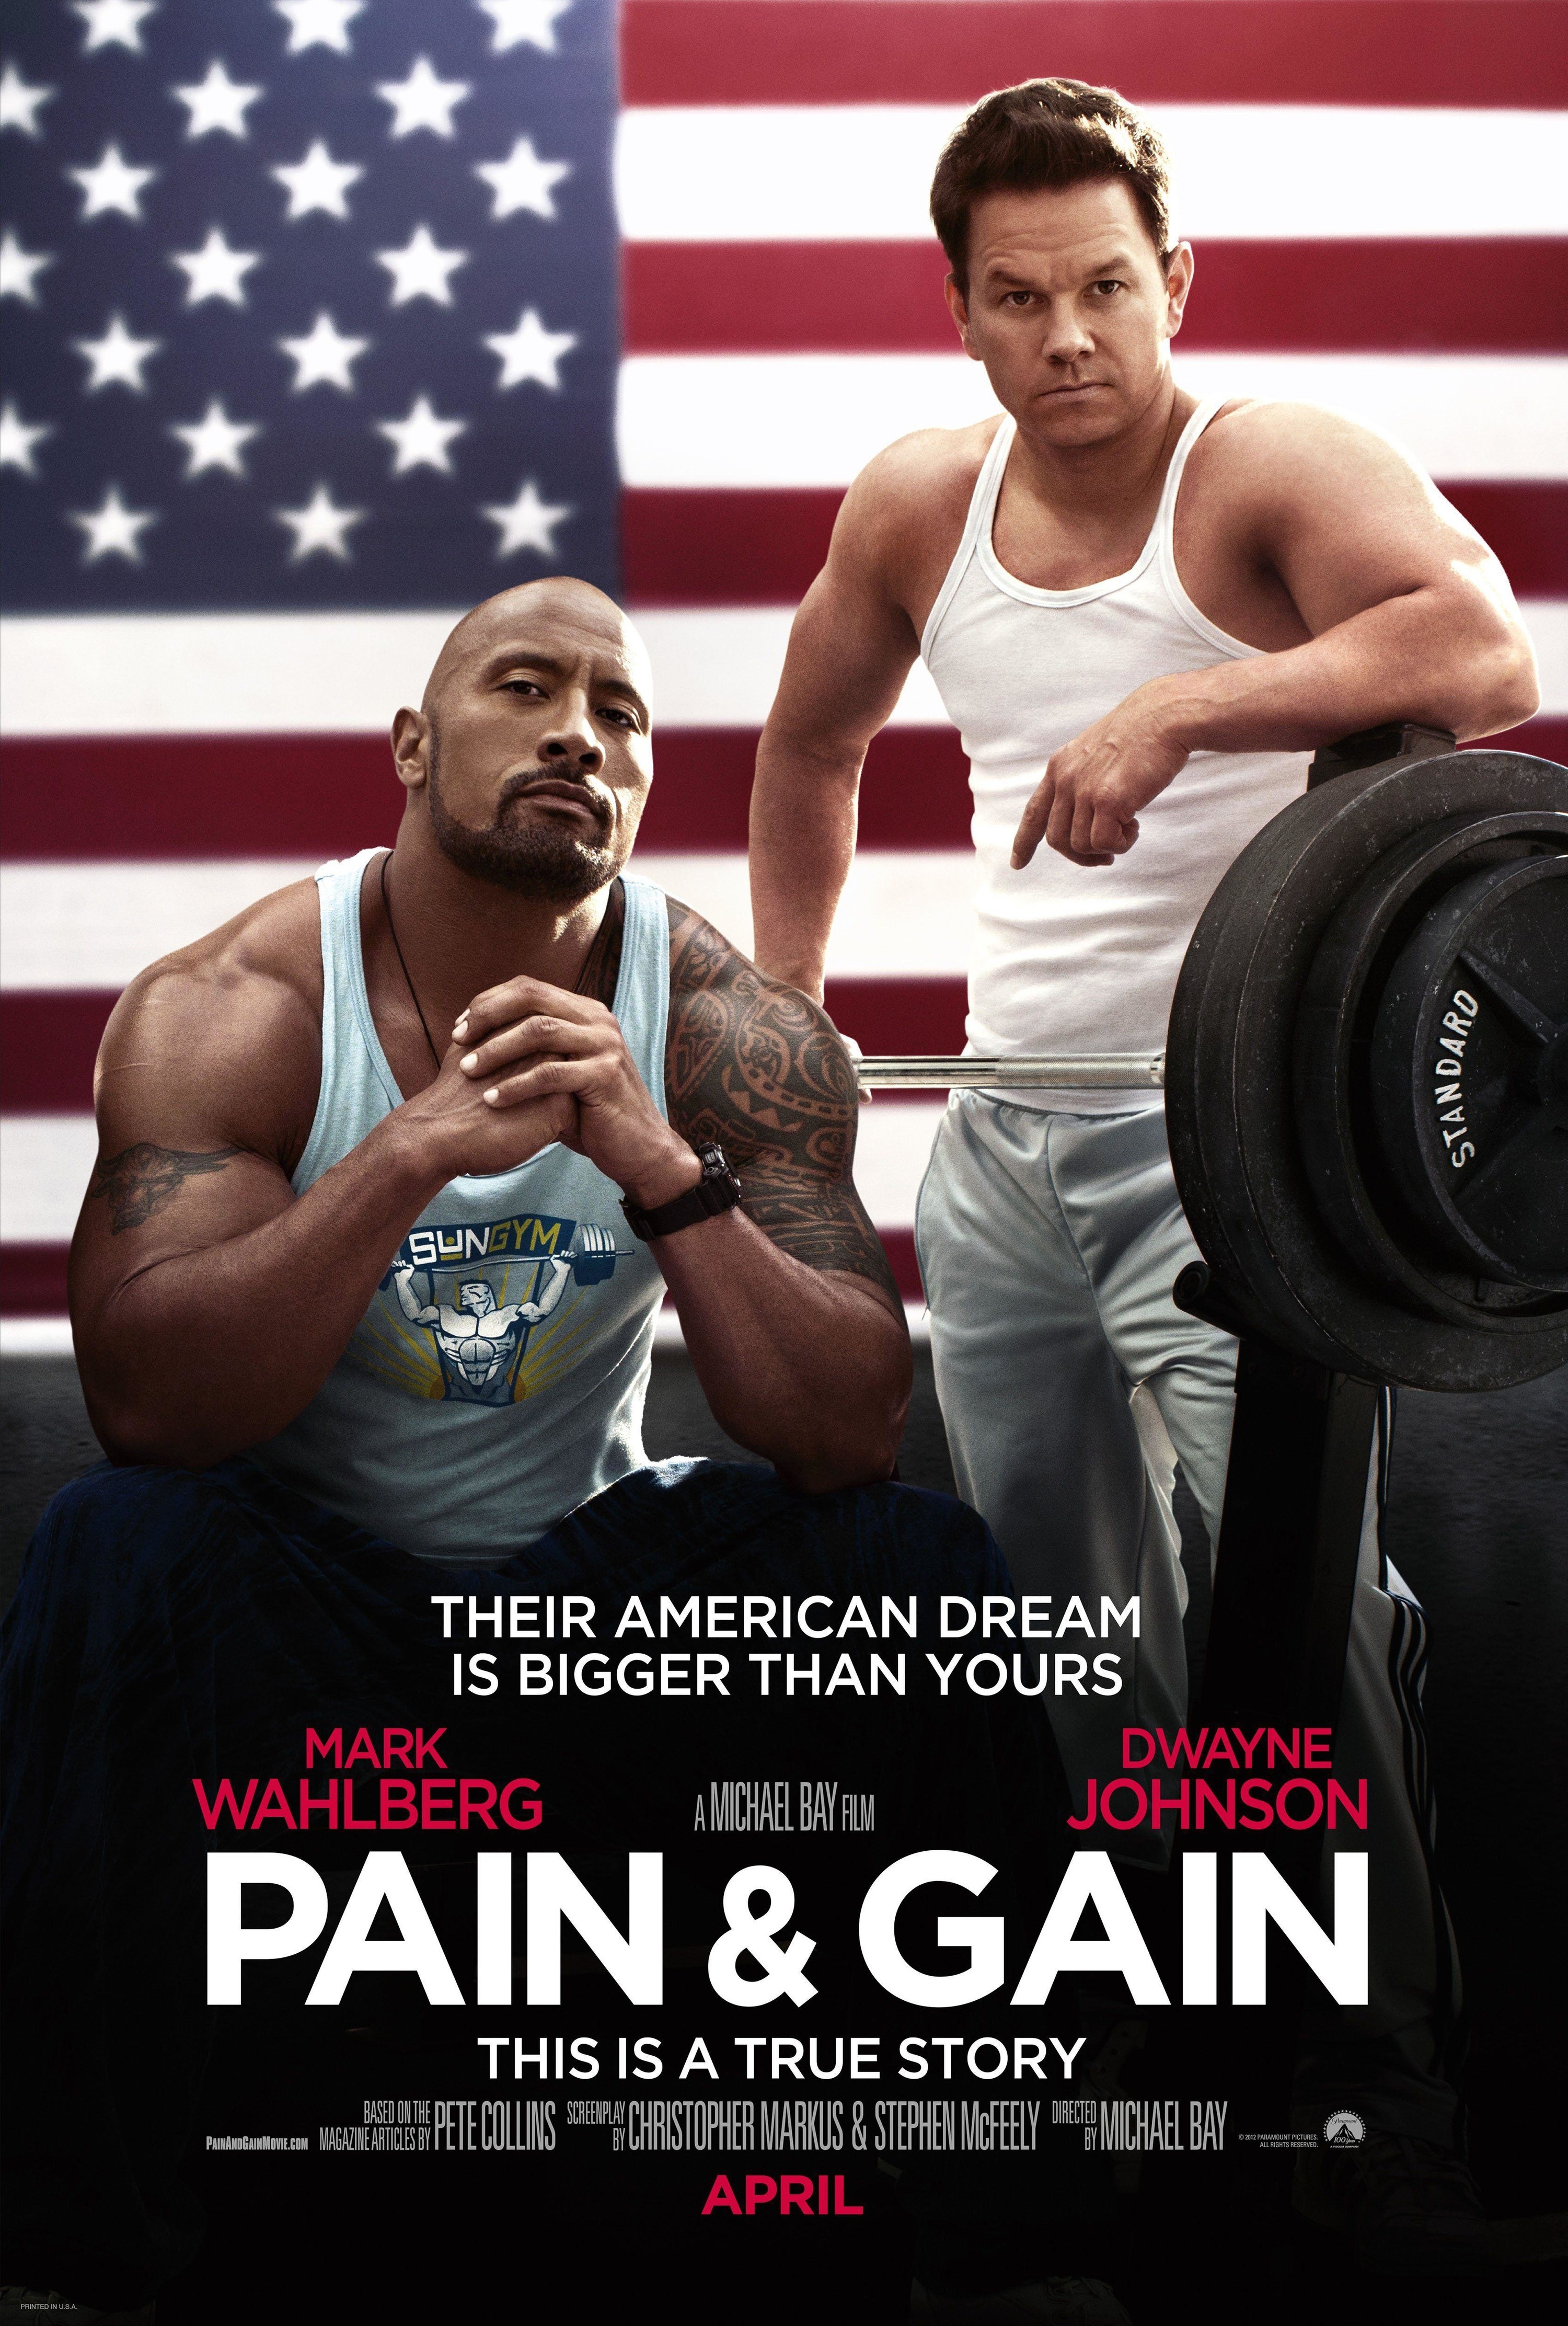 Poster image for the movie &quot;Pain &amp;amp; Gain&quot; depicting Dwayne &quot;The Rock&quot; Johnson and Mark Wahlberg sitting in front of the American flag